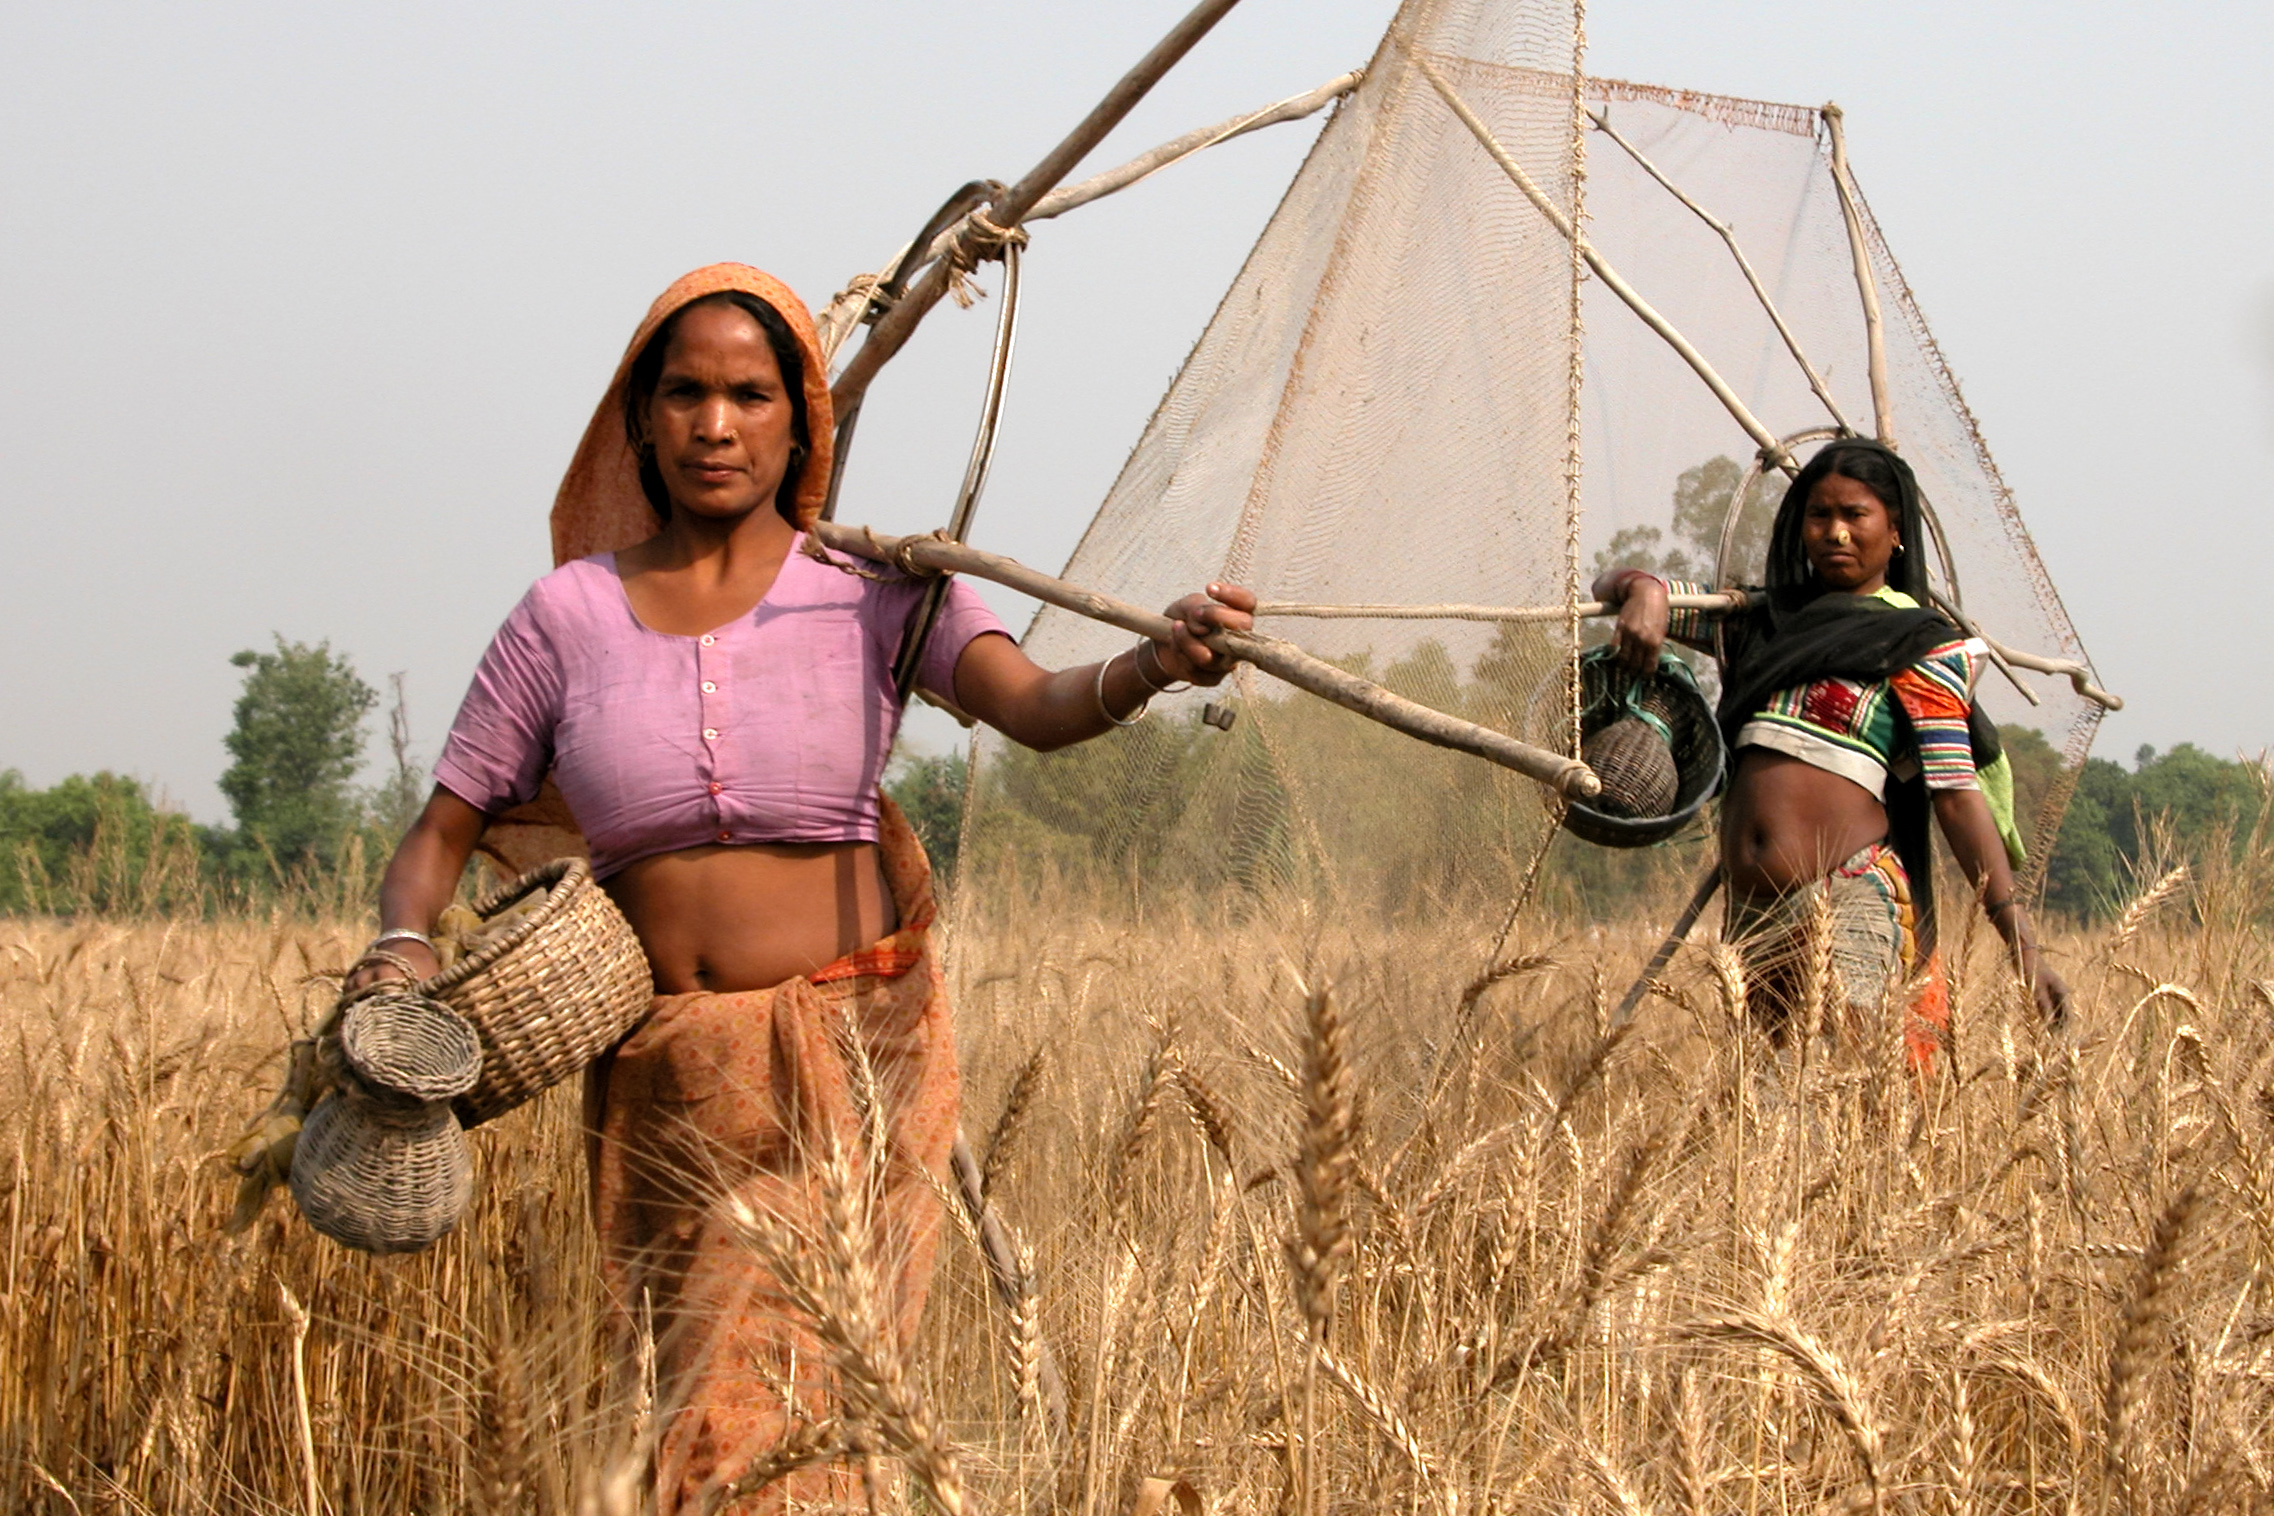 2 women walk through a field carrying a fishing net built with netting and branches